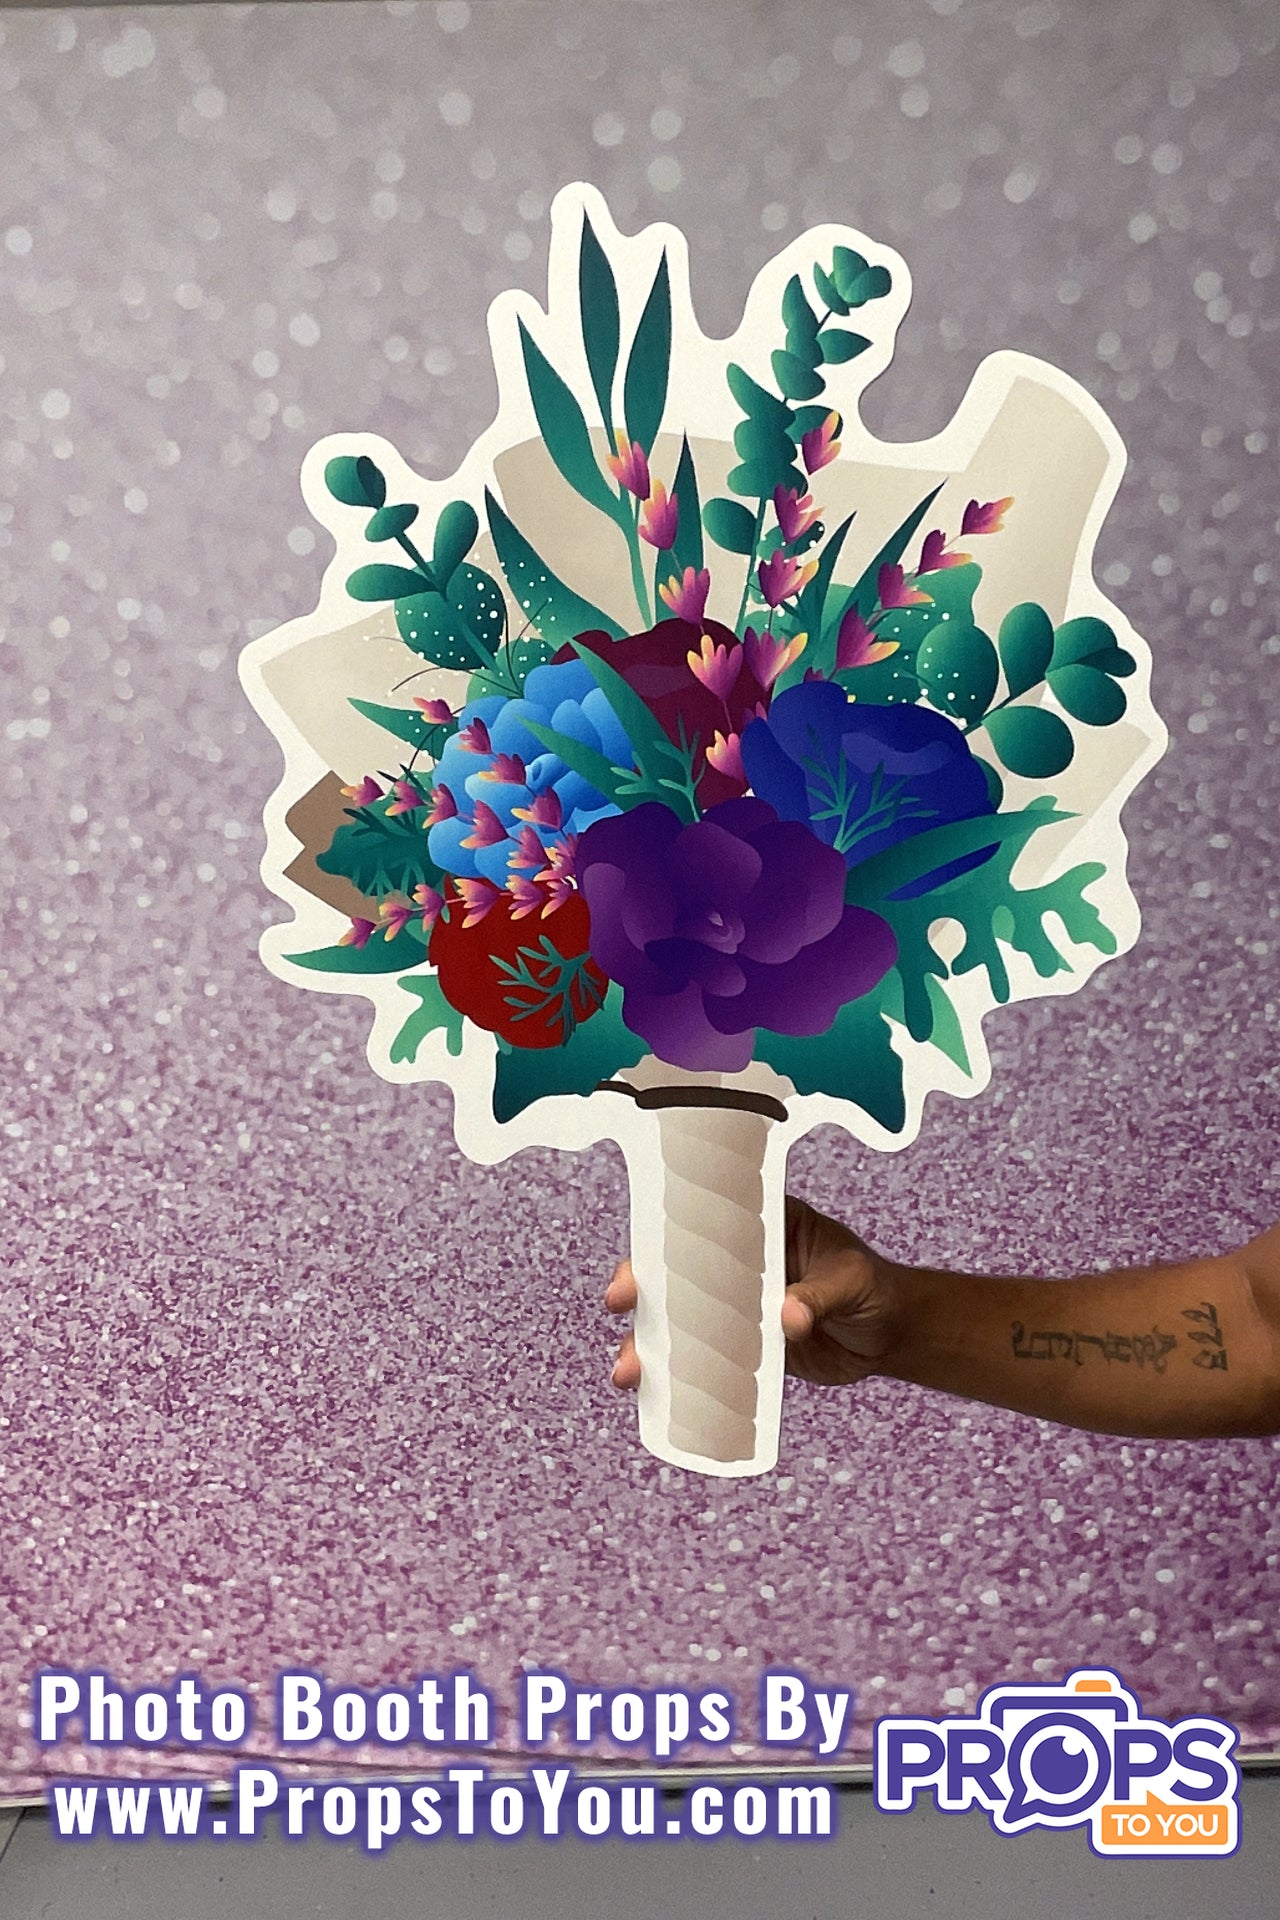 HUGE Props: Colorful Bouquet Photo Booth Prop